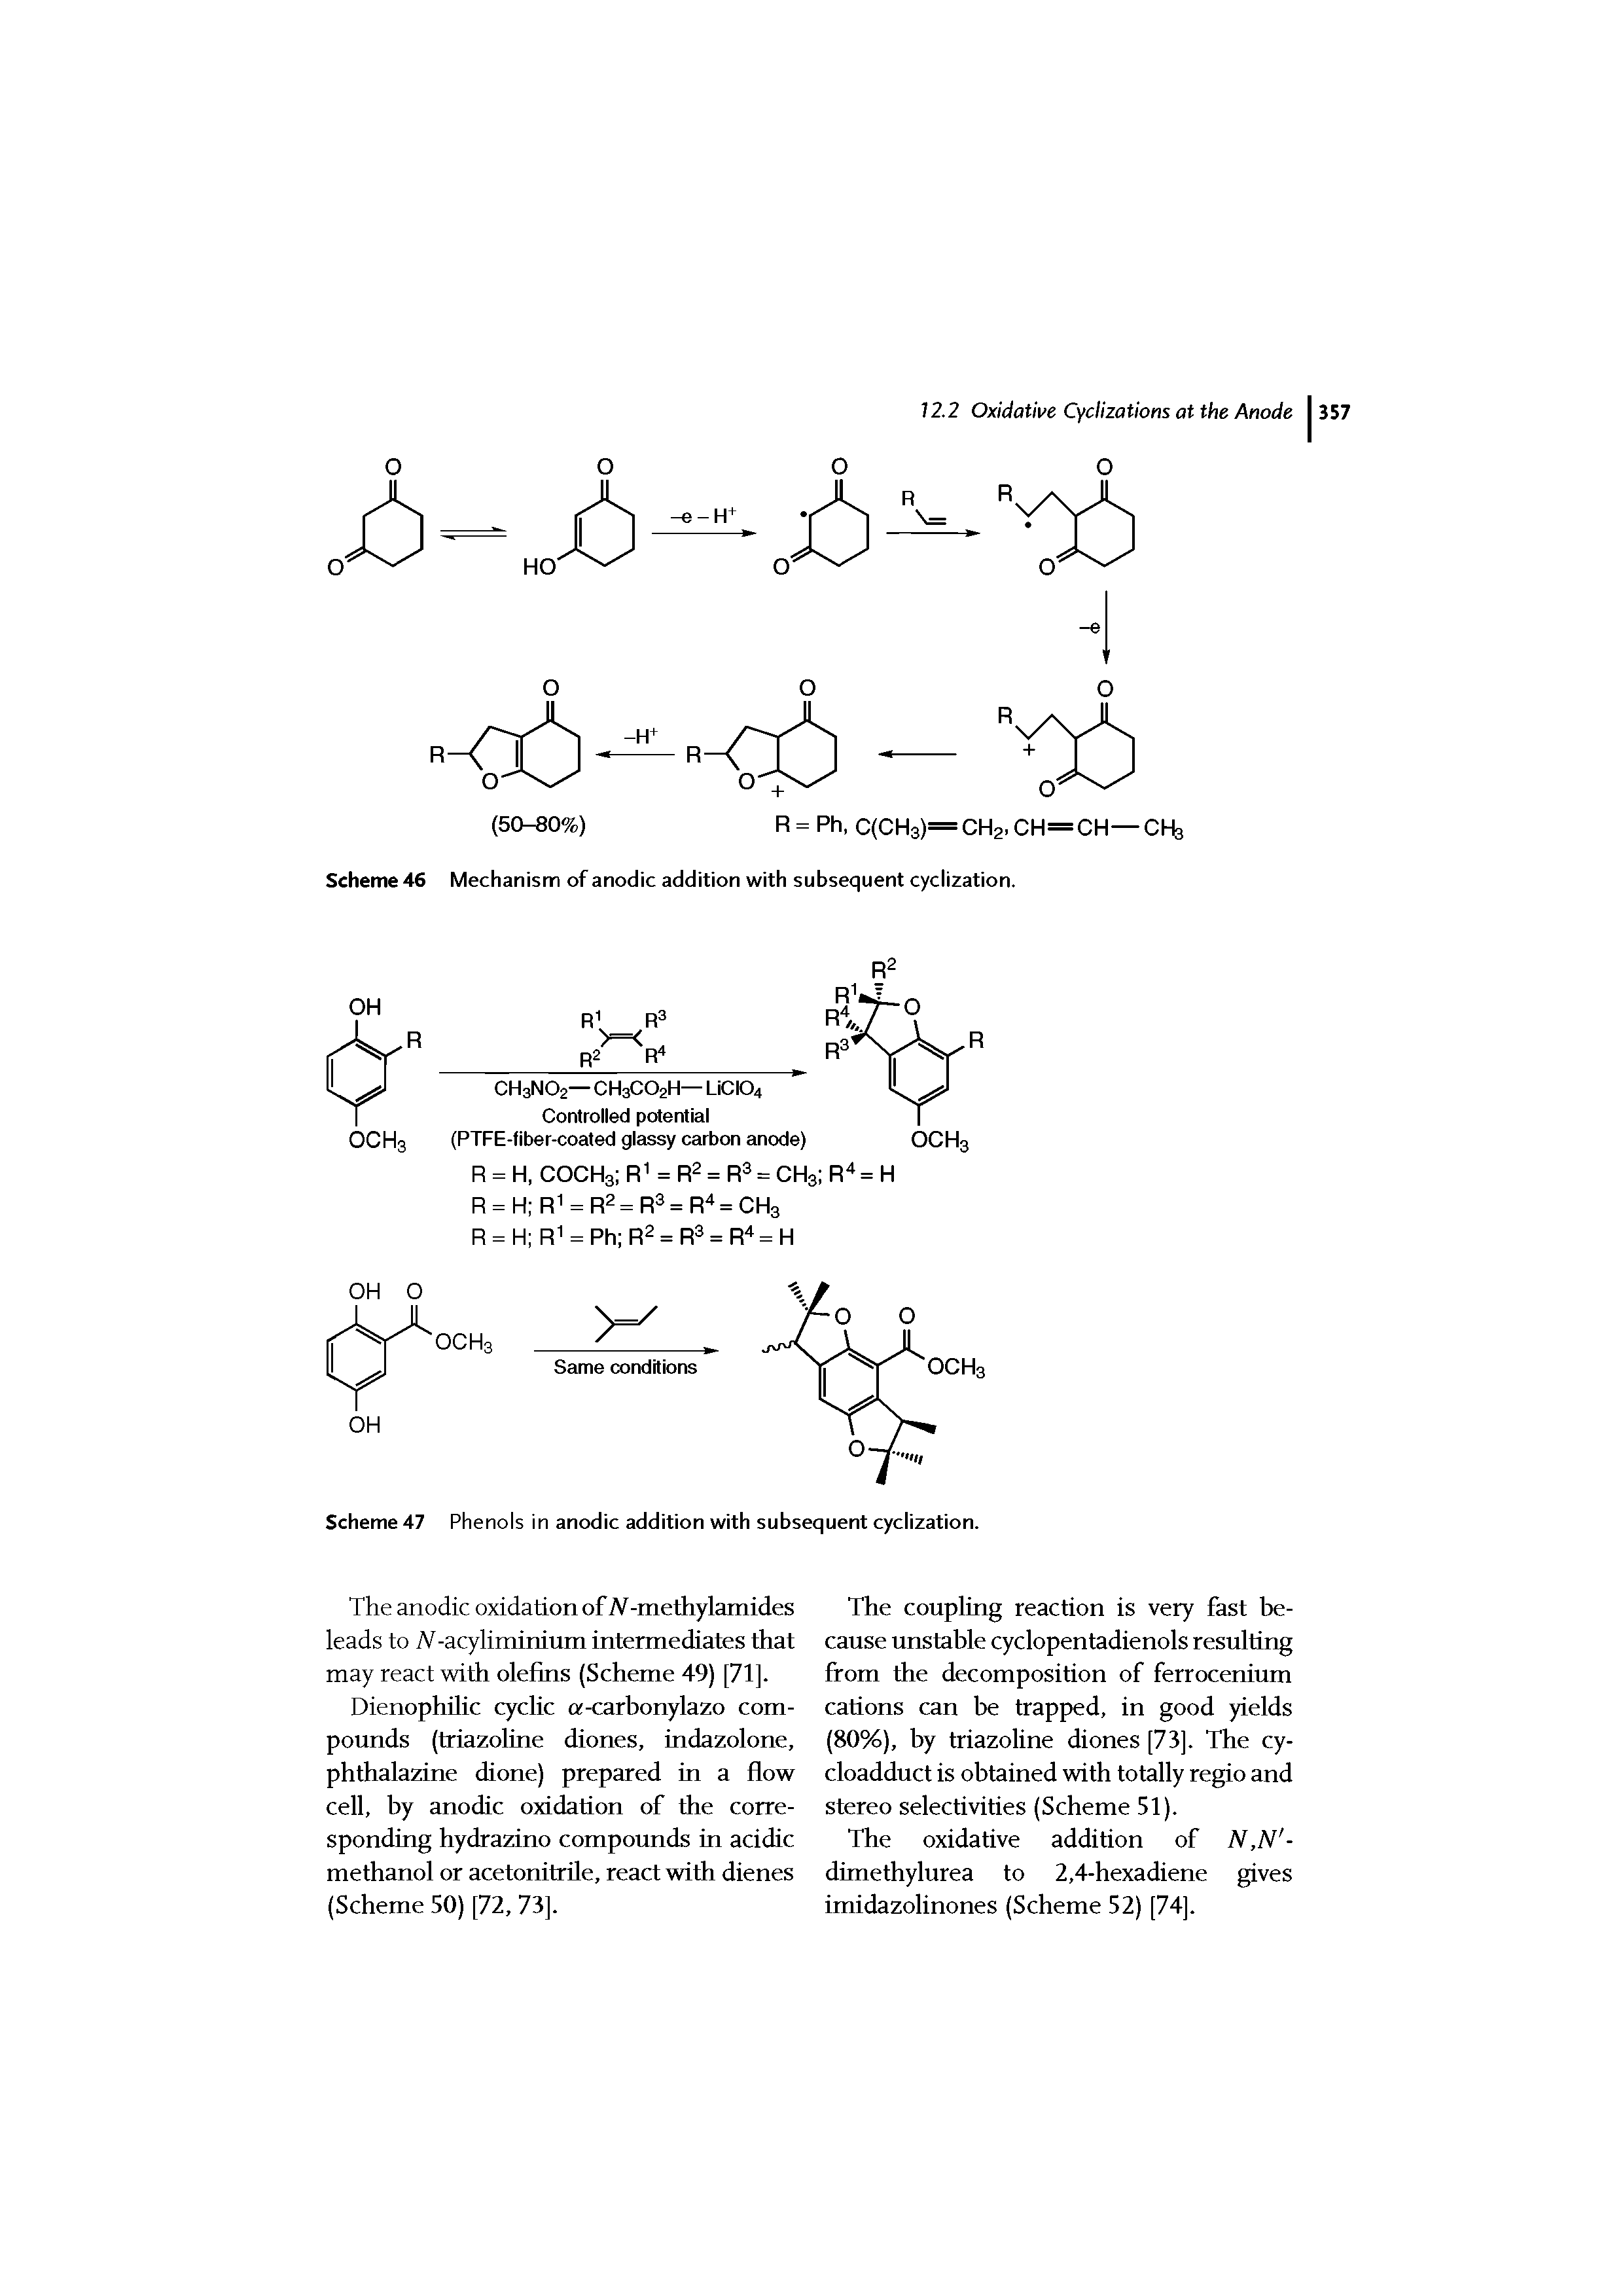 Scheme 46 Mechanism of anodic addition with subsequent cyclization...